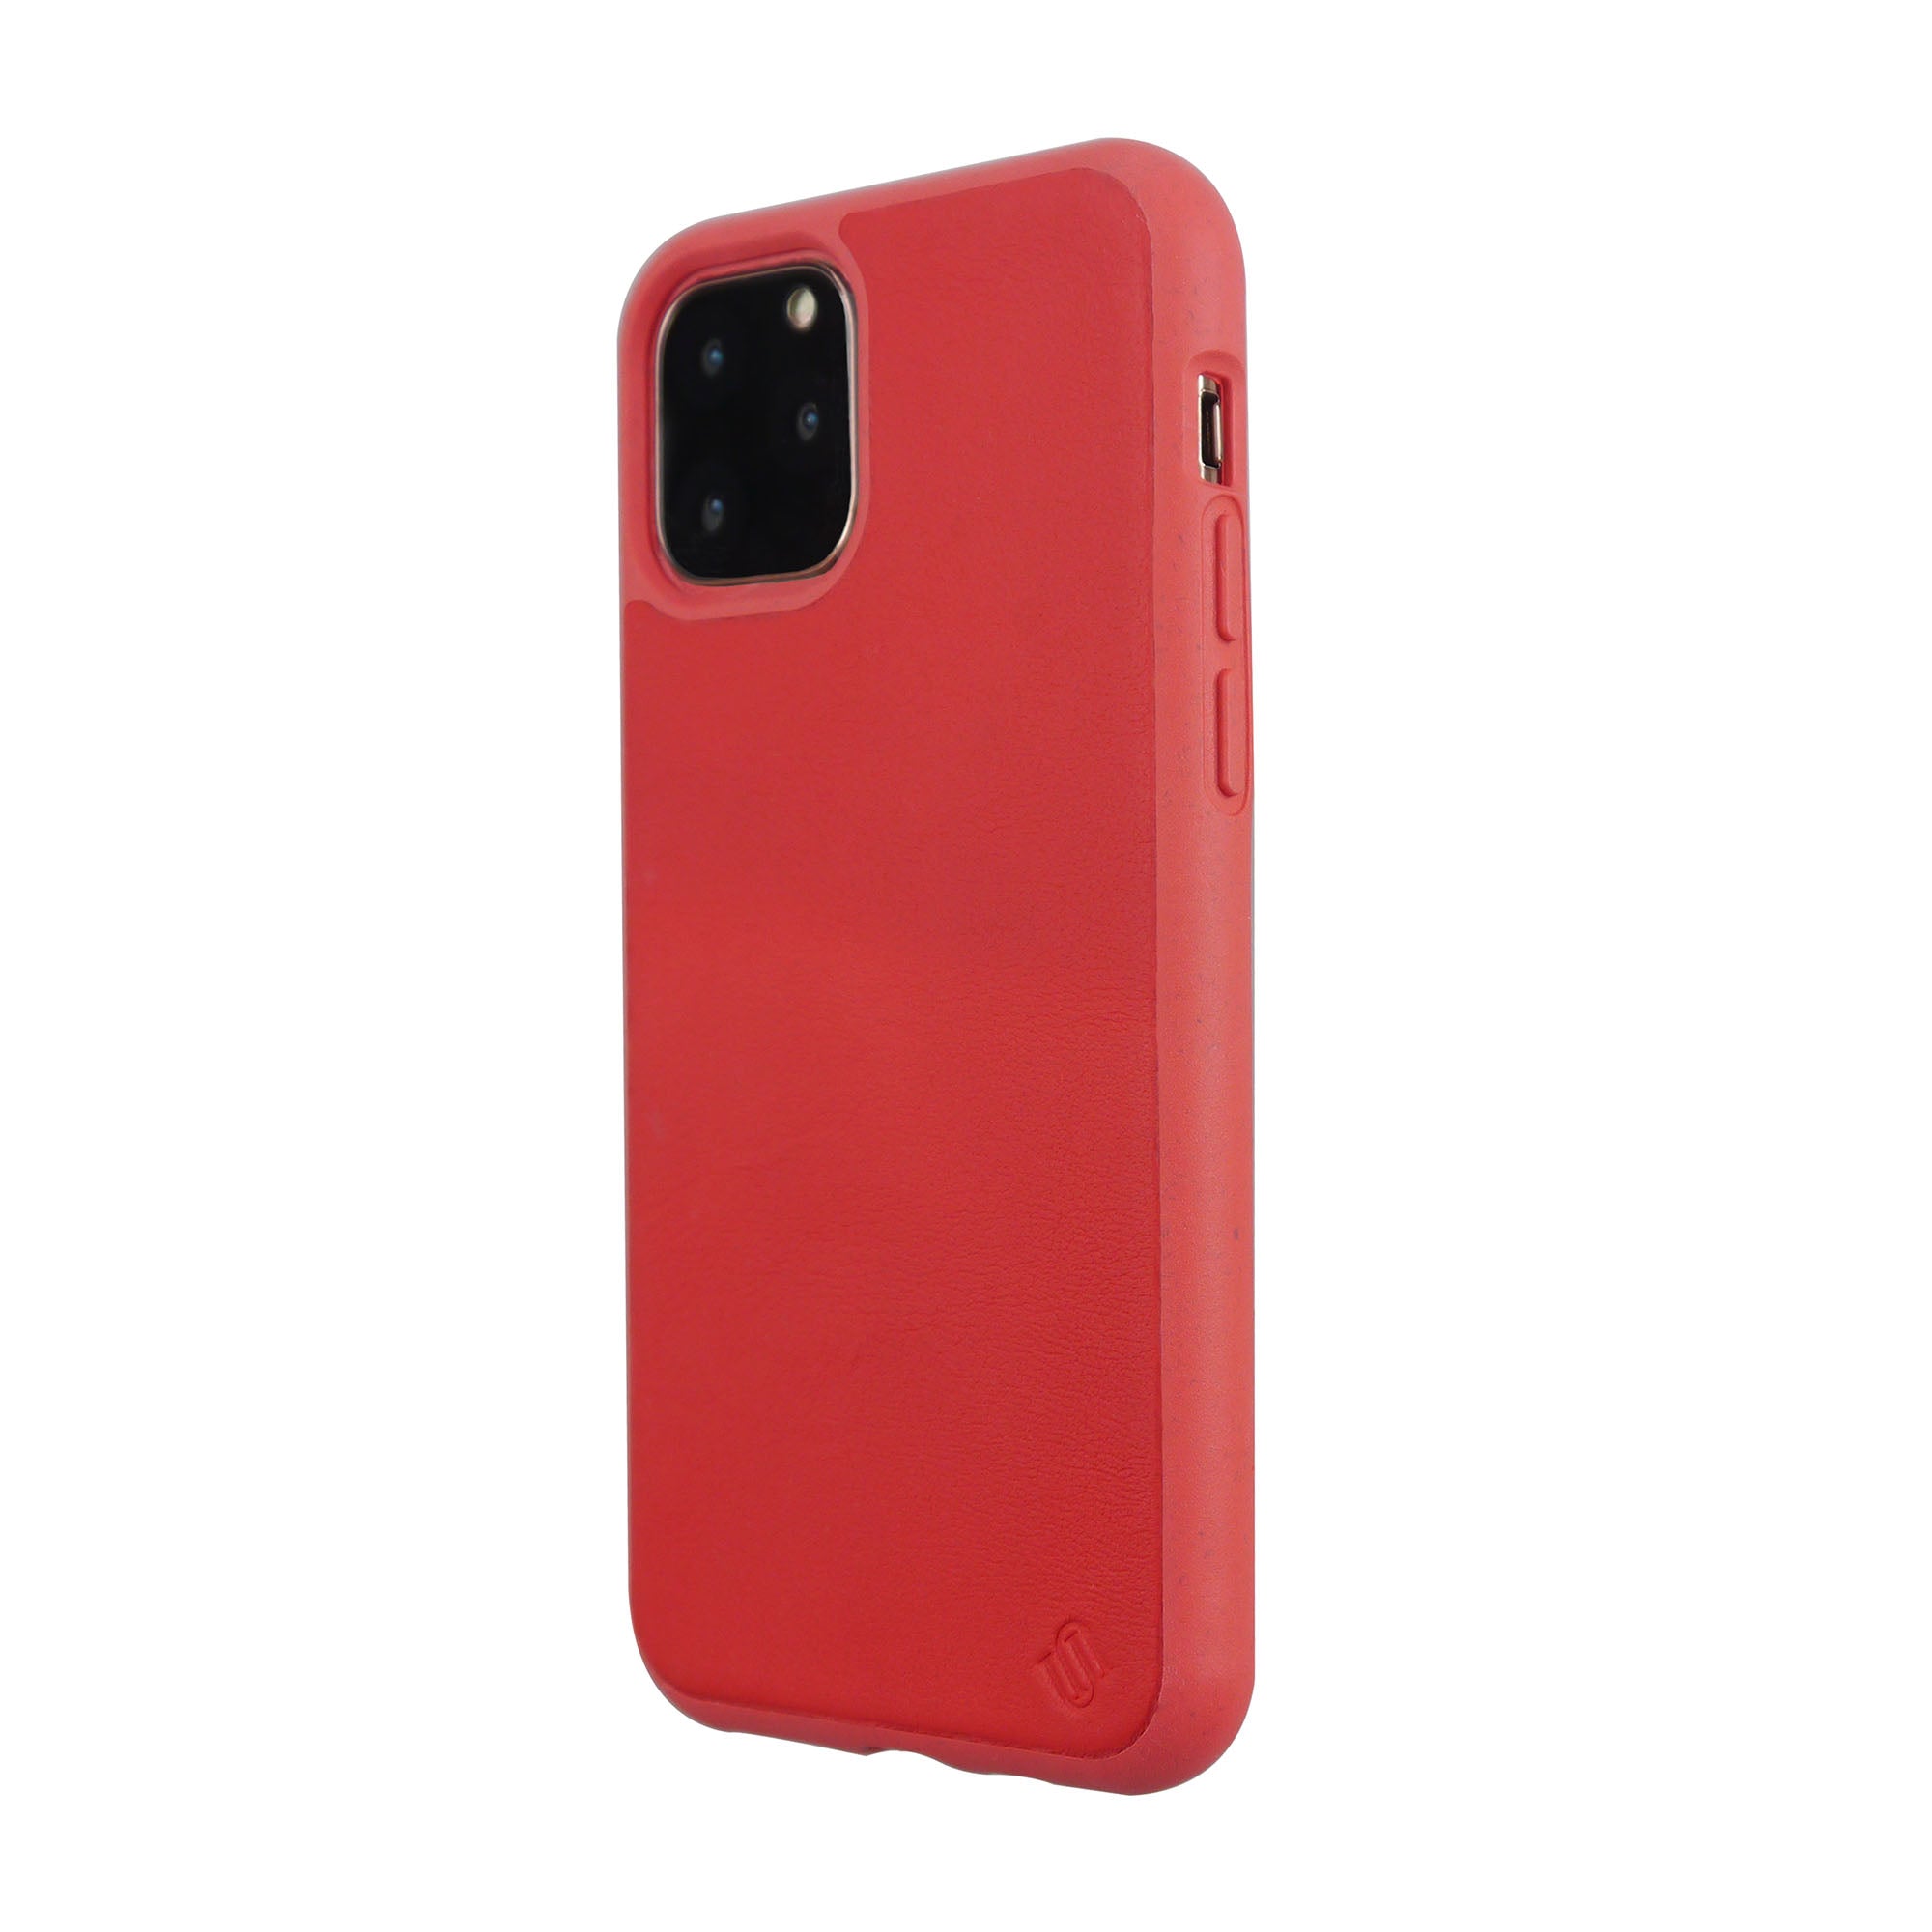 iPhone 11 Pro Uunique Red (Cherry) Nutrisiti Eco Leather Back Case - 15-05066